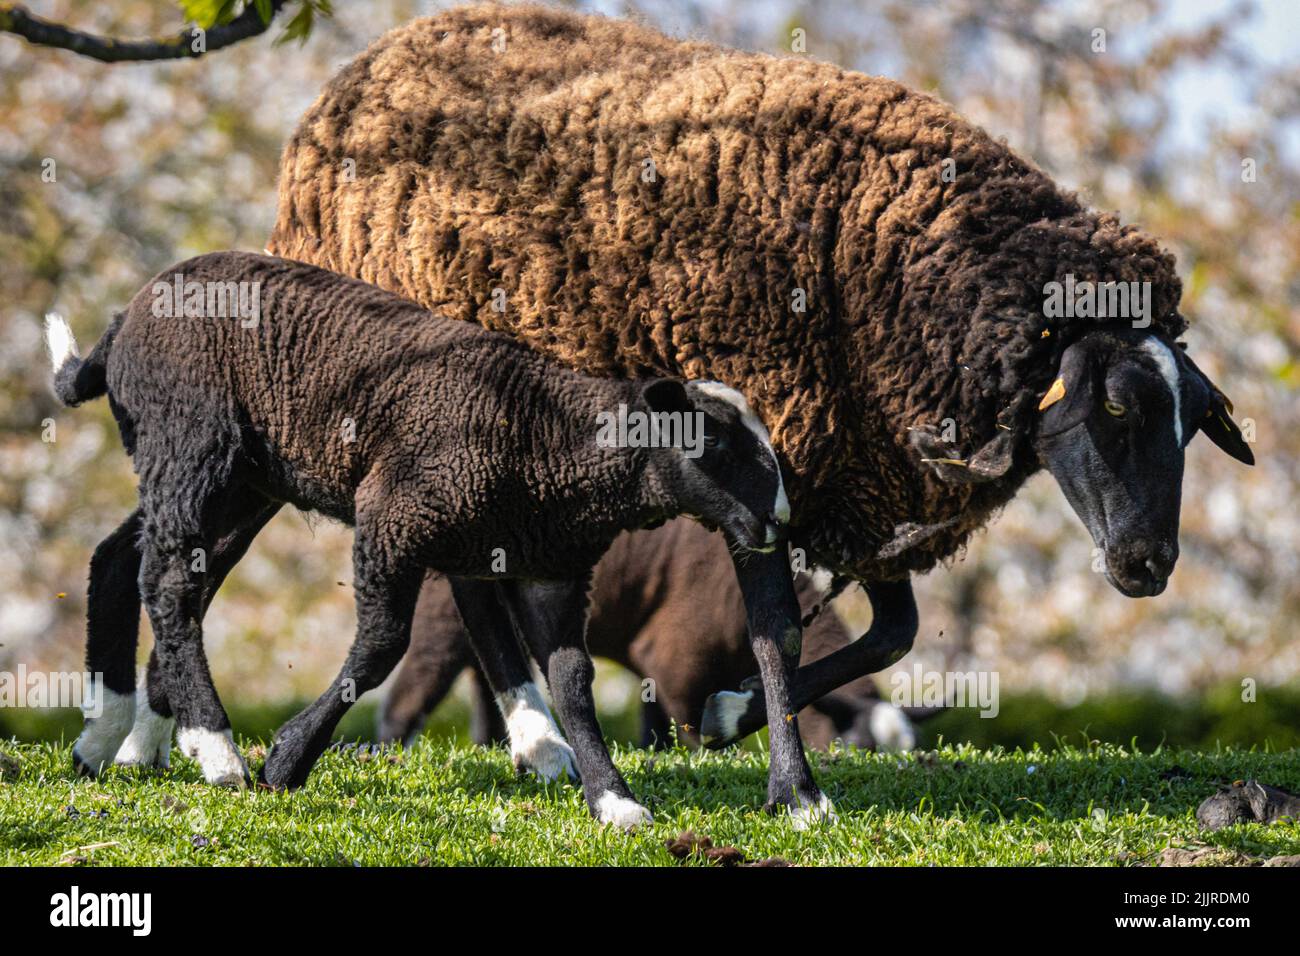 A Suffolk sheep and a black small lamb on a green grass Stock Photo